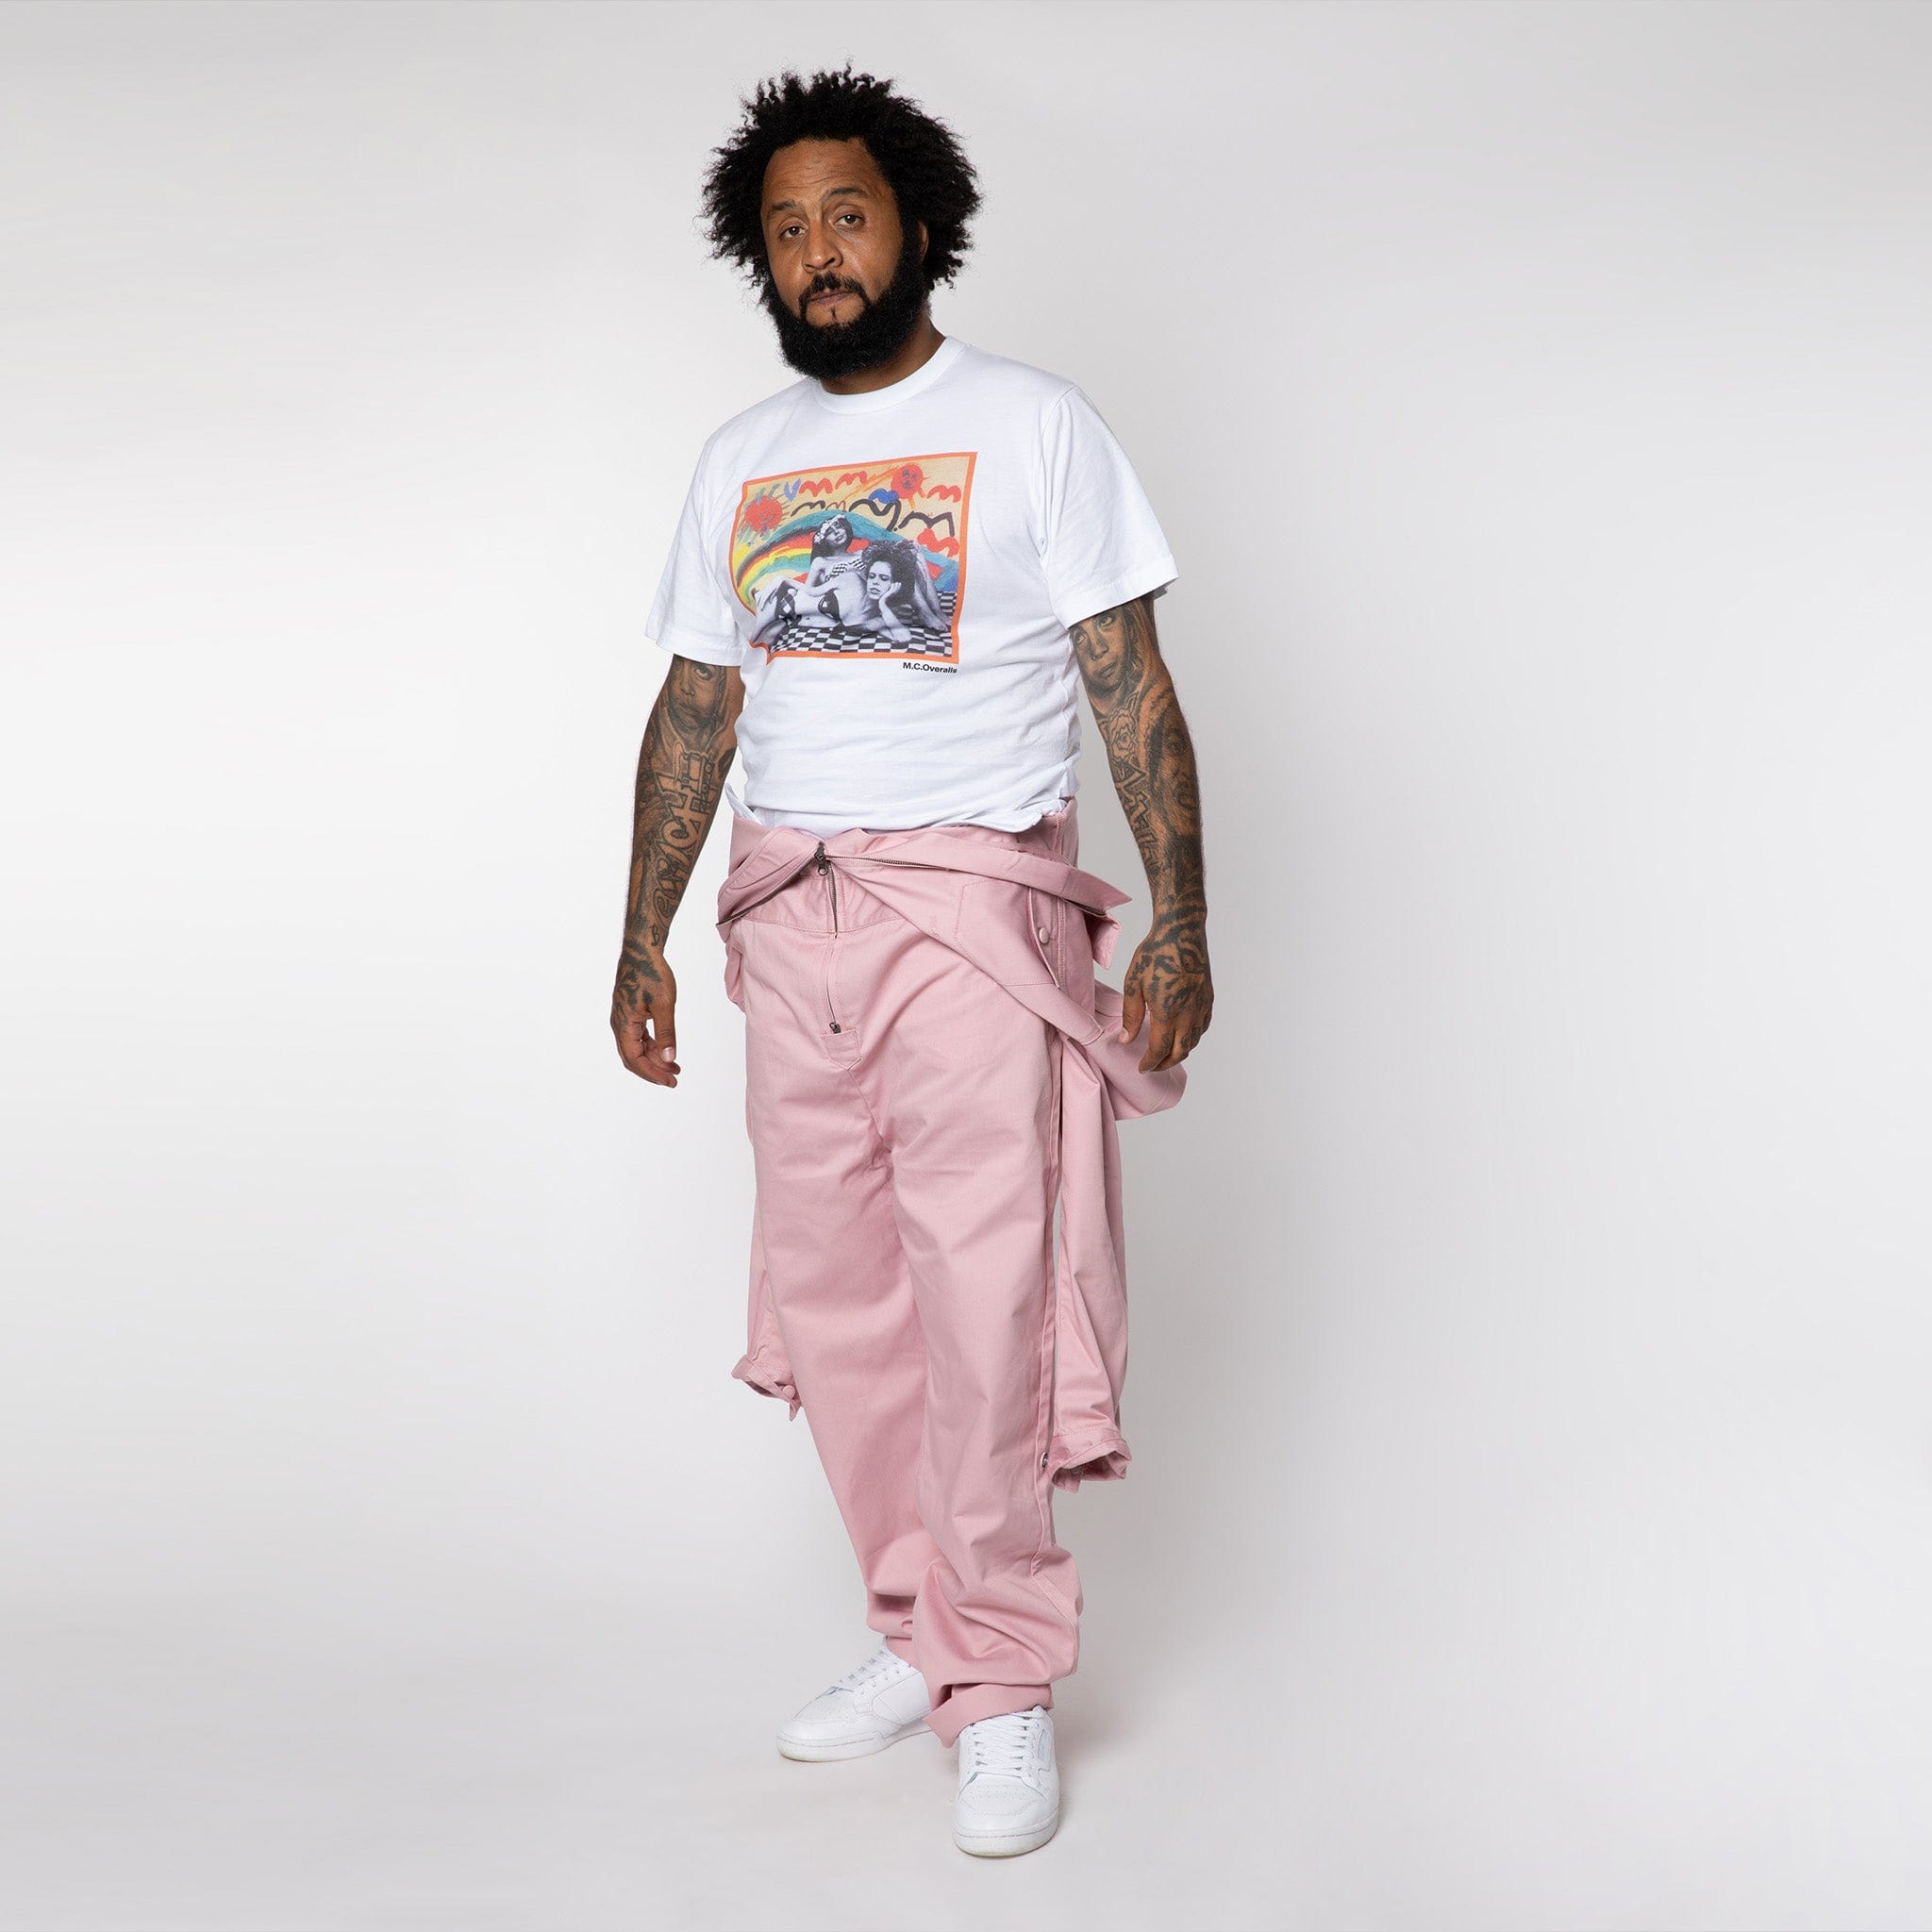 M.C.O's Dusty Pink Work Overalls and White Graphic Tee for Men in London, UK.